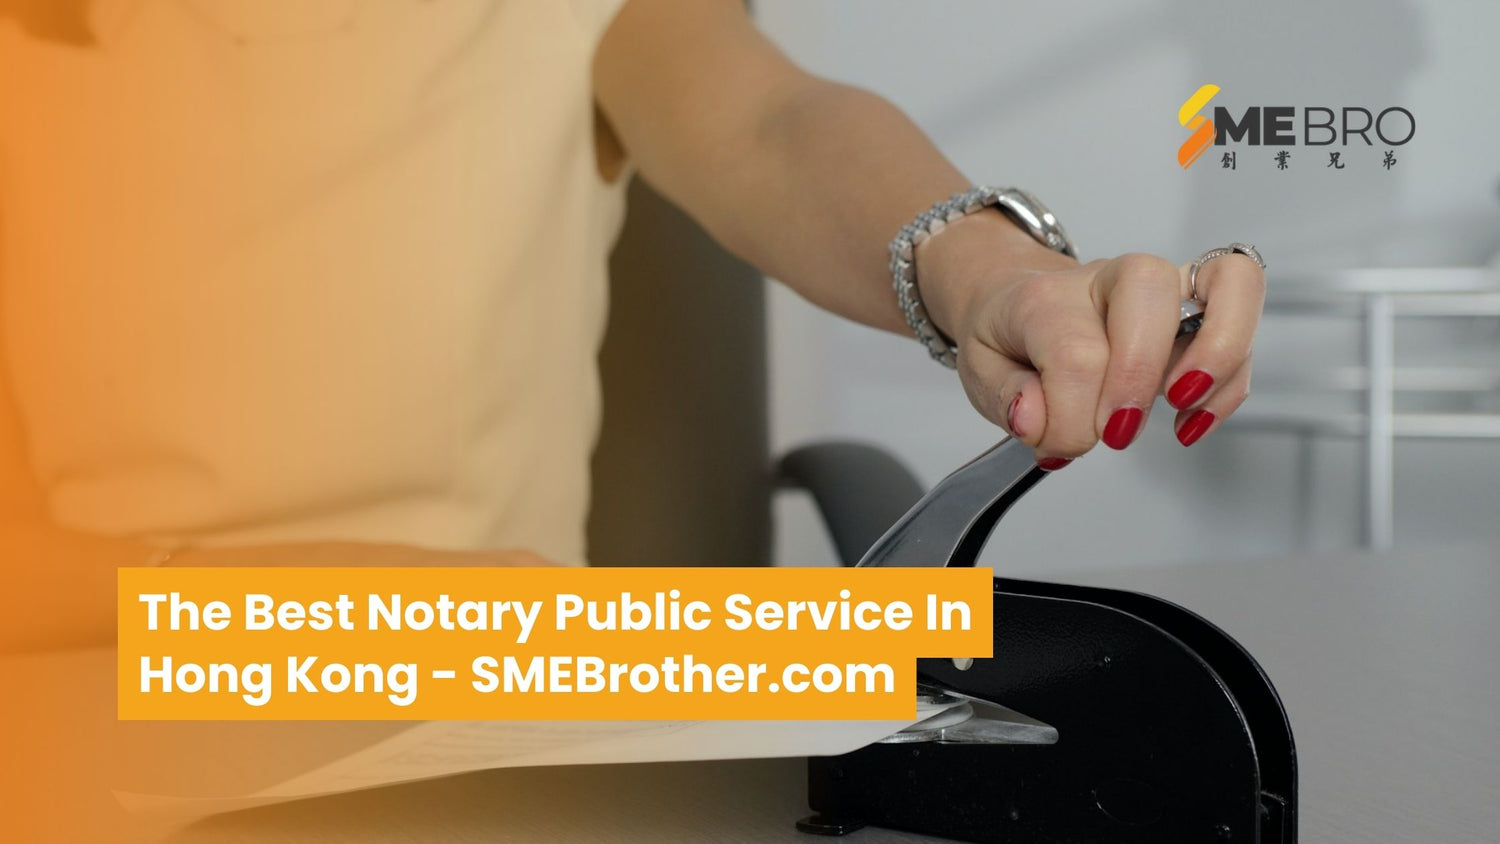 Notary Public Service In Hong Kong